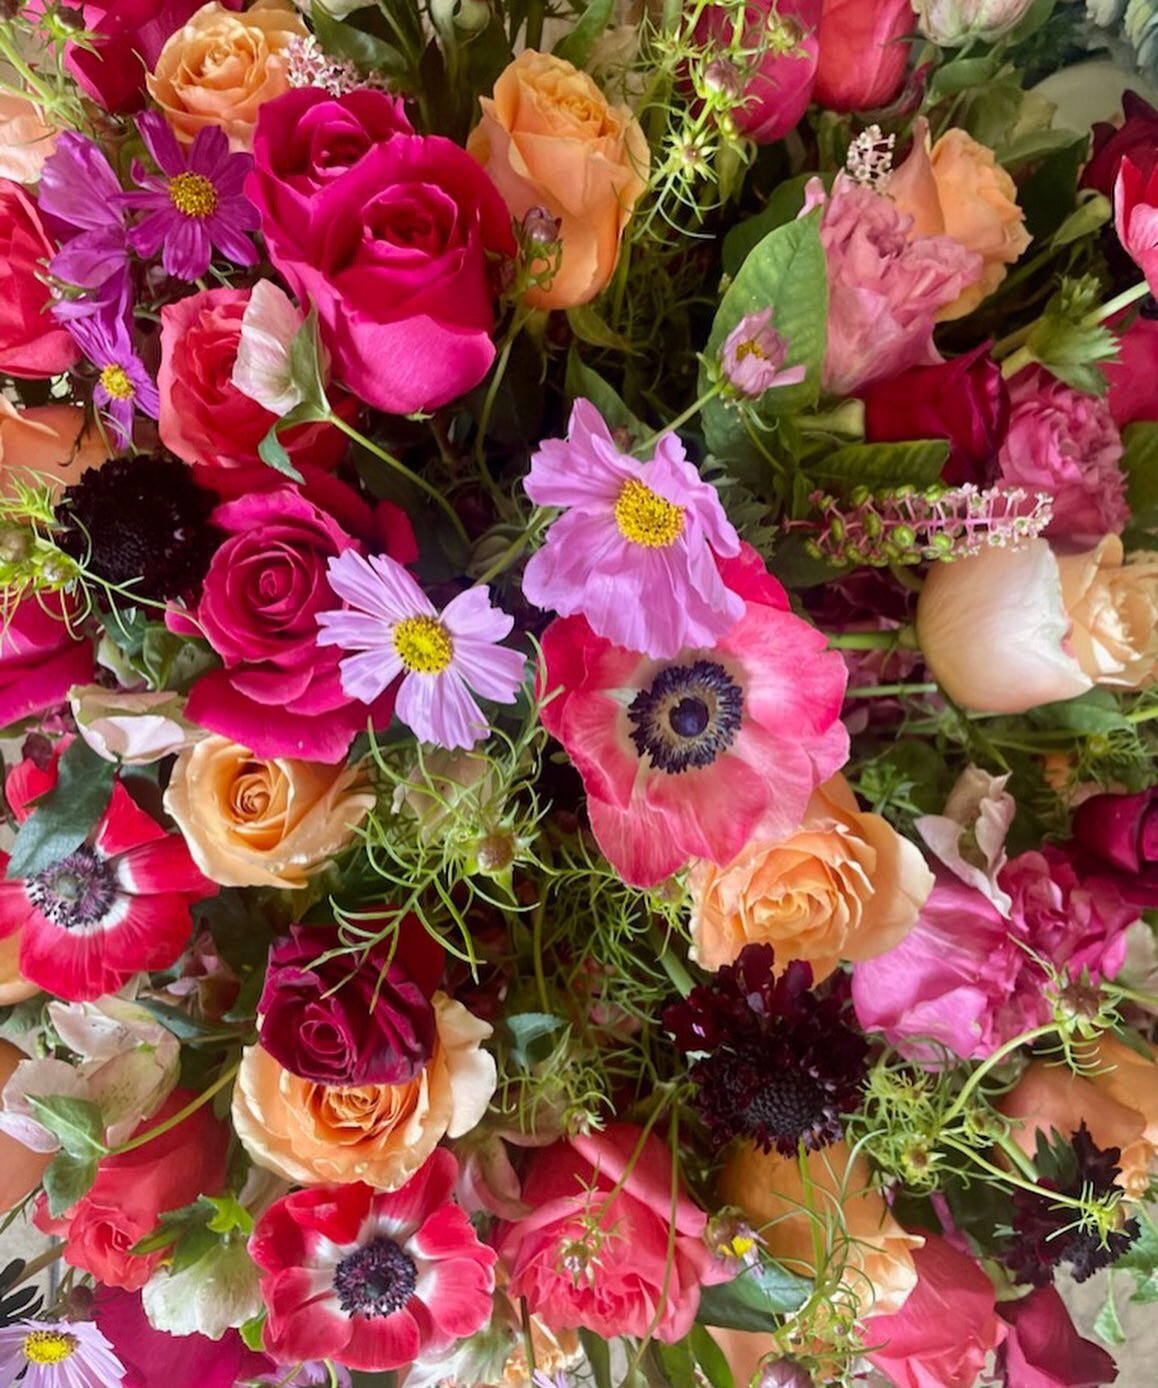 Color, joy and happiness for your weekend! Happy Saturday! 🌸🌹🌸🌹 
.
.
.
.
#florals #floraldesigns #pretty #colorful #joy #happiness #weekend #hogue_weddings #montecito #santabarbara